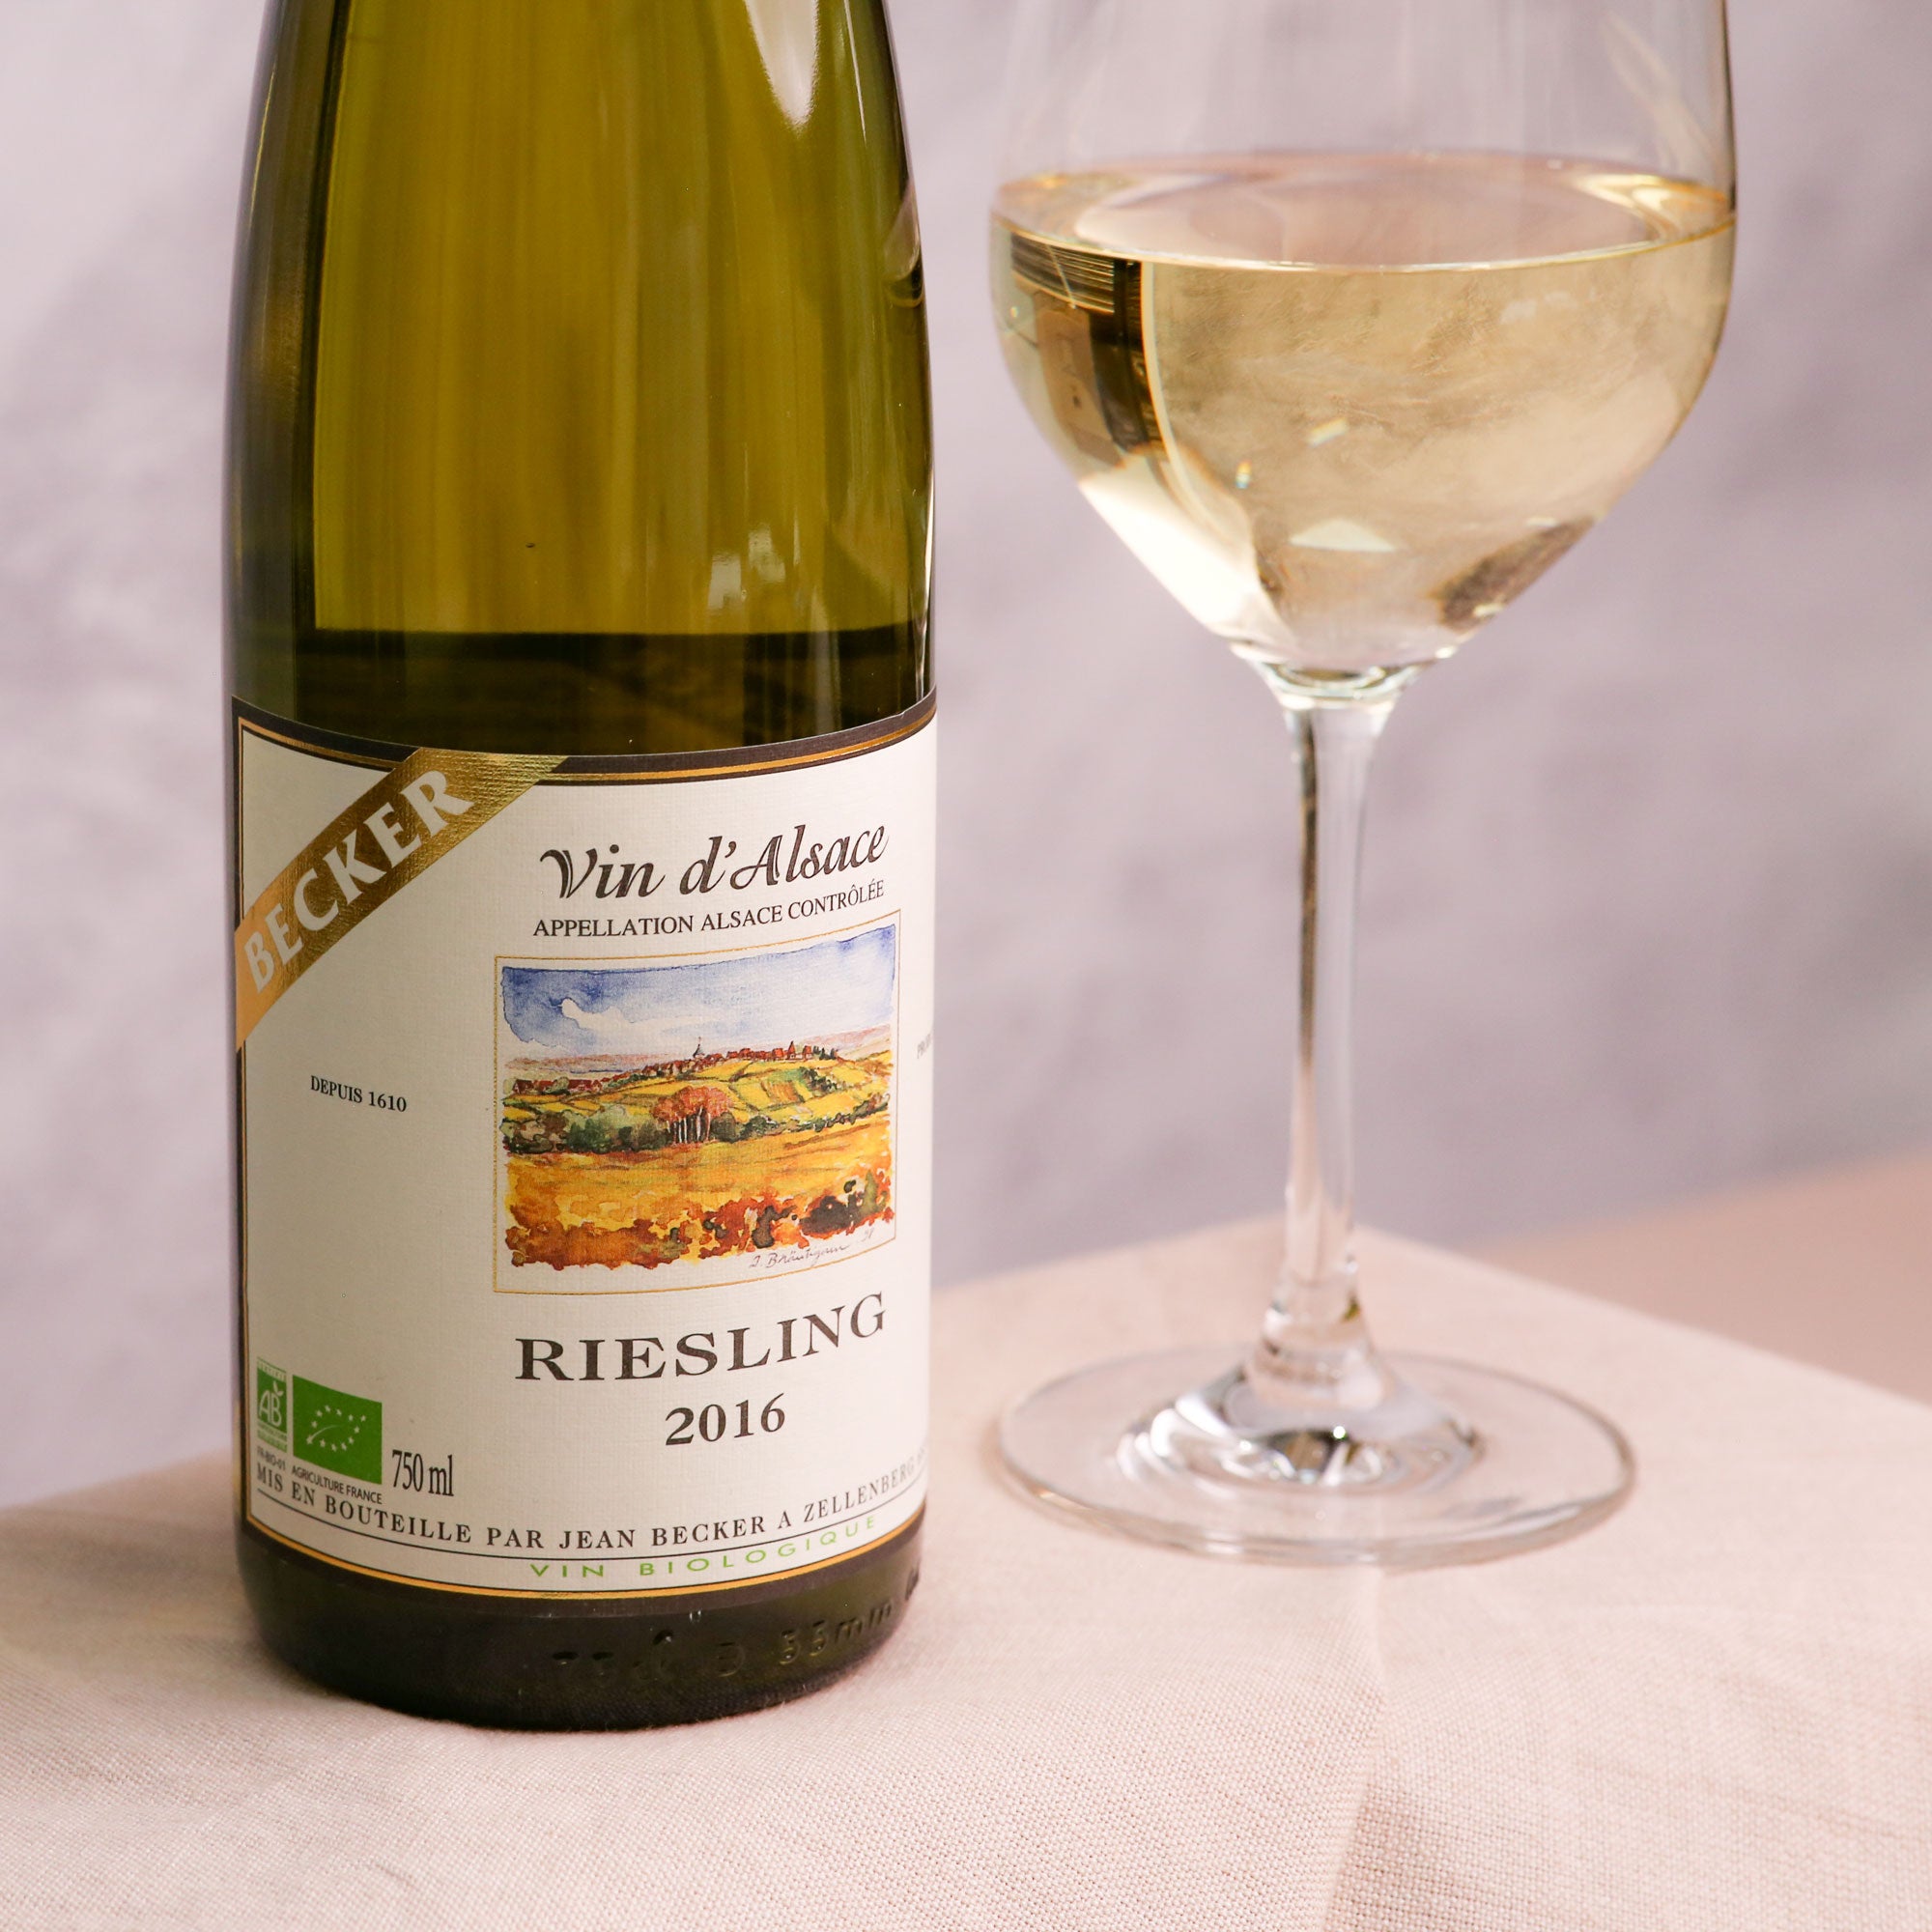 Riesling Organic Domaine Jean Becker, Alsace, France 2016